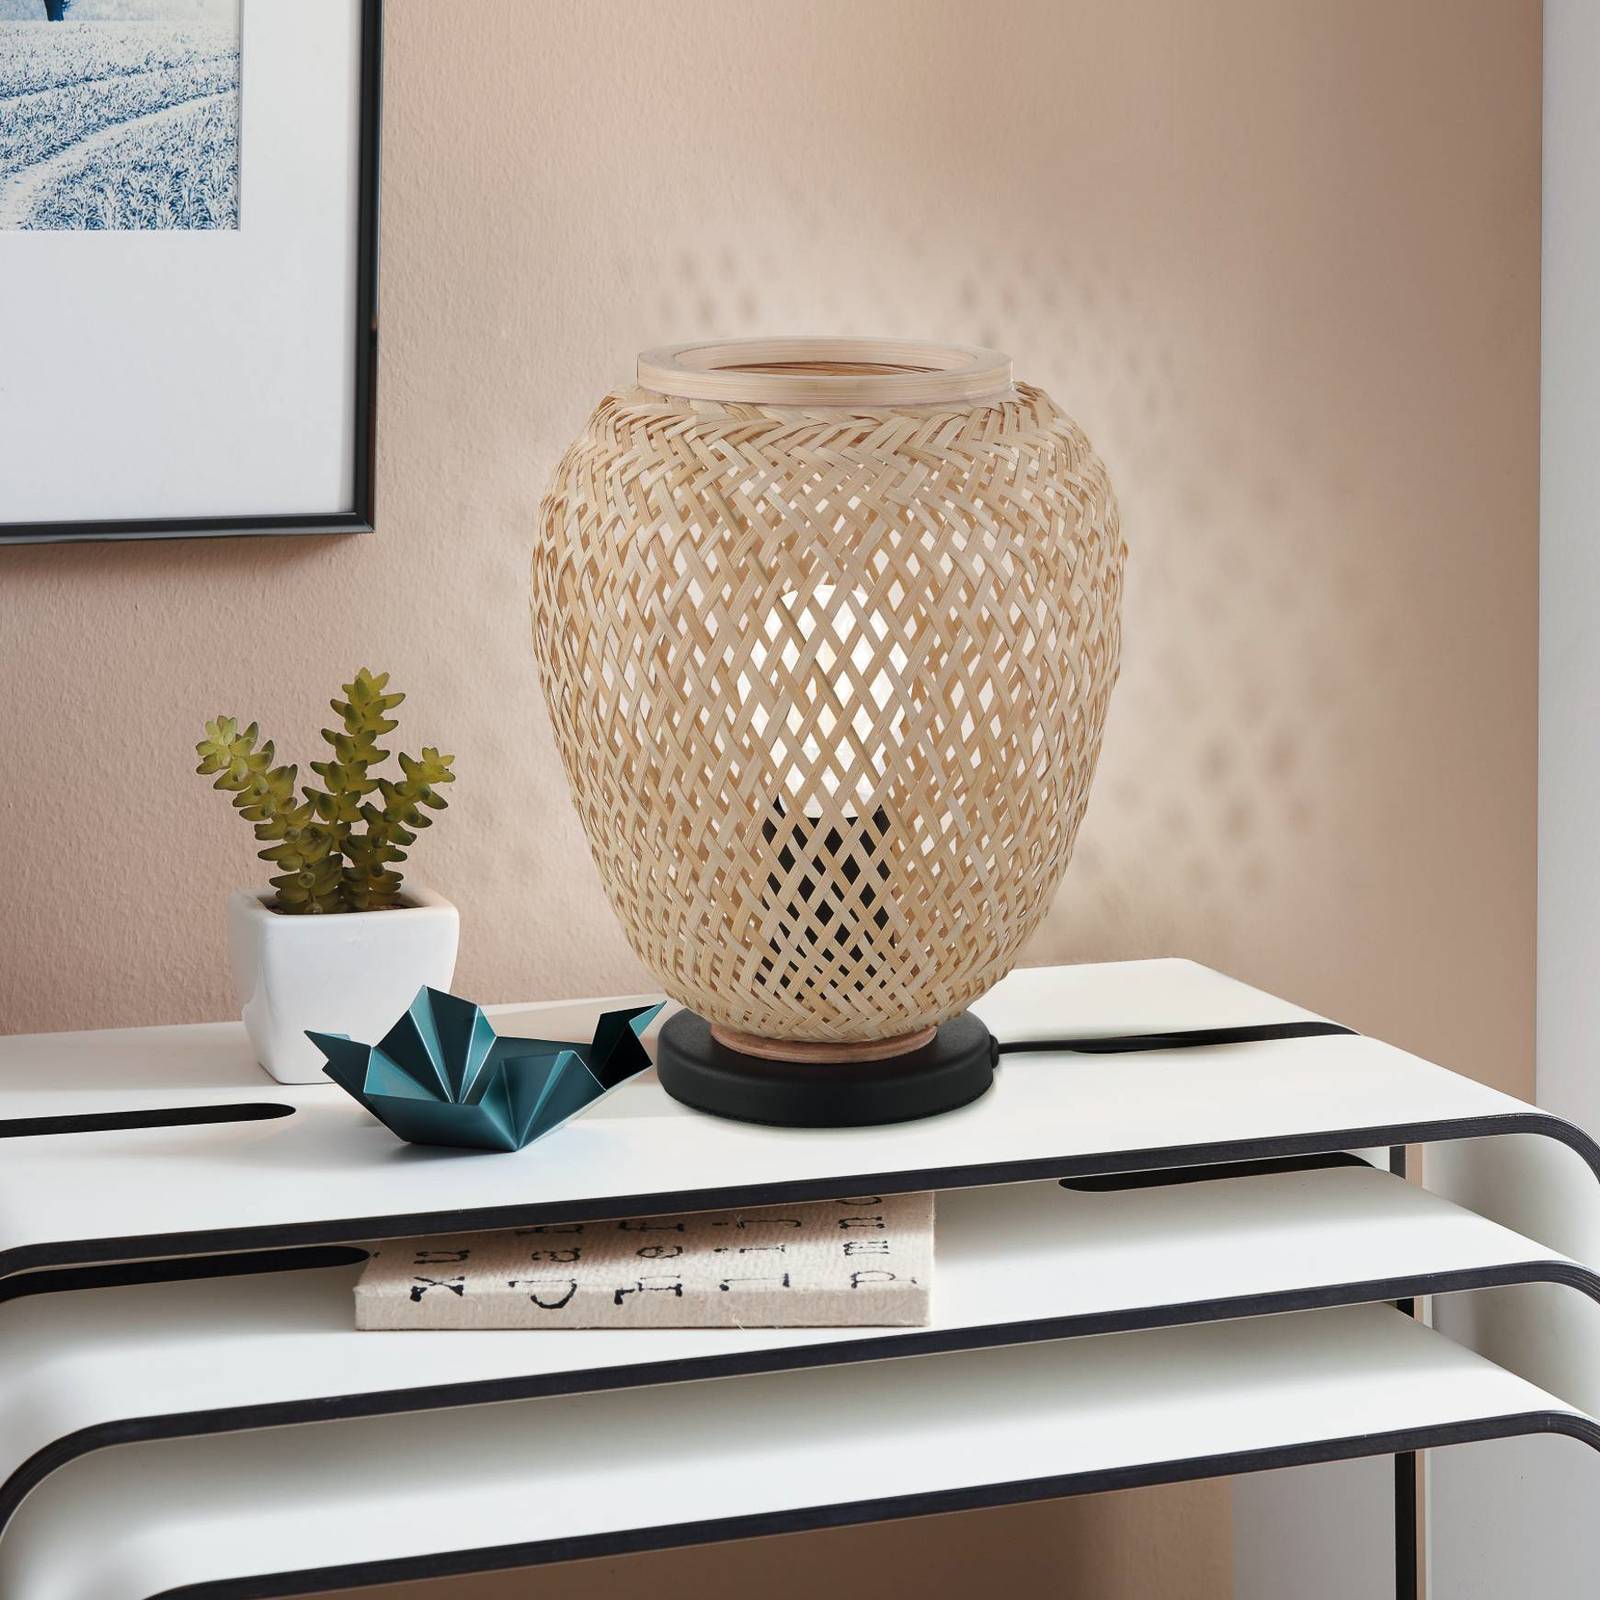 EGLO Dembleby table lamp in natural wood